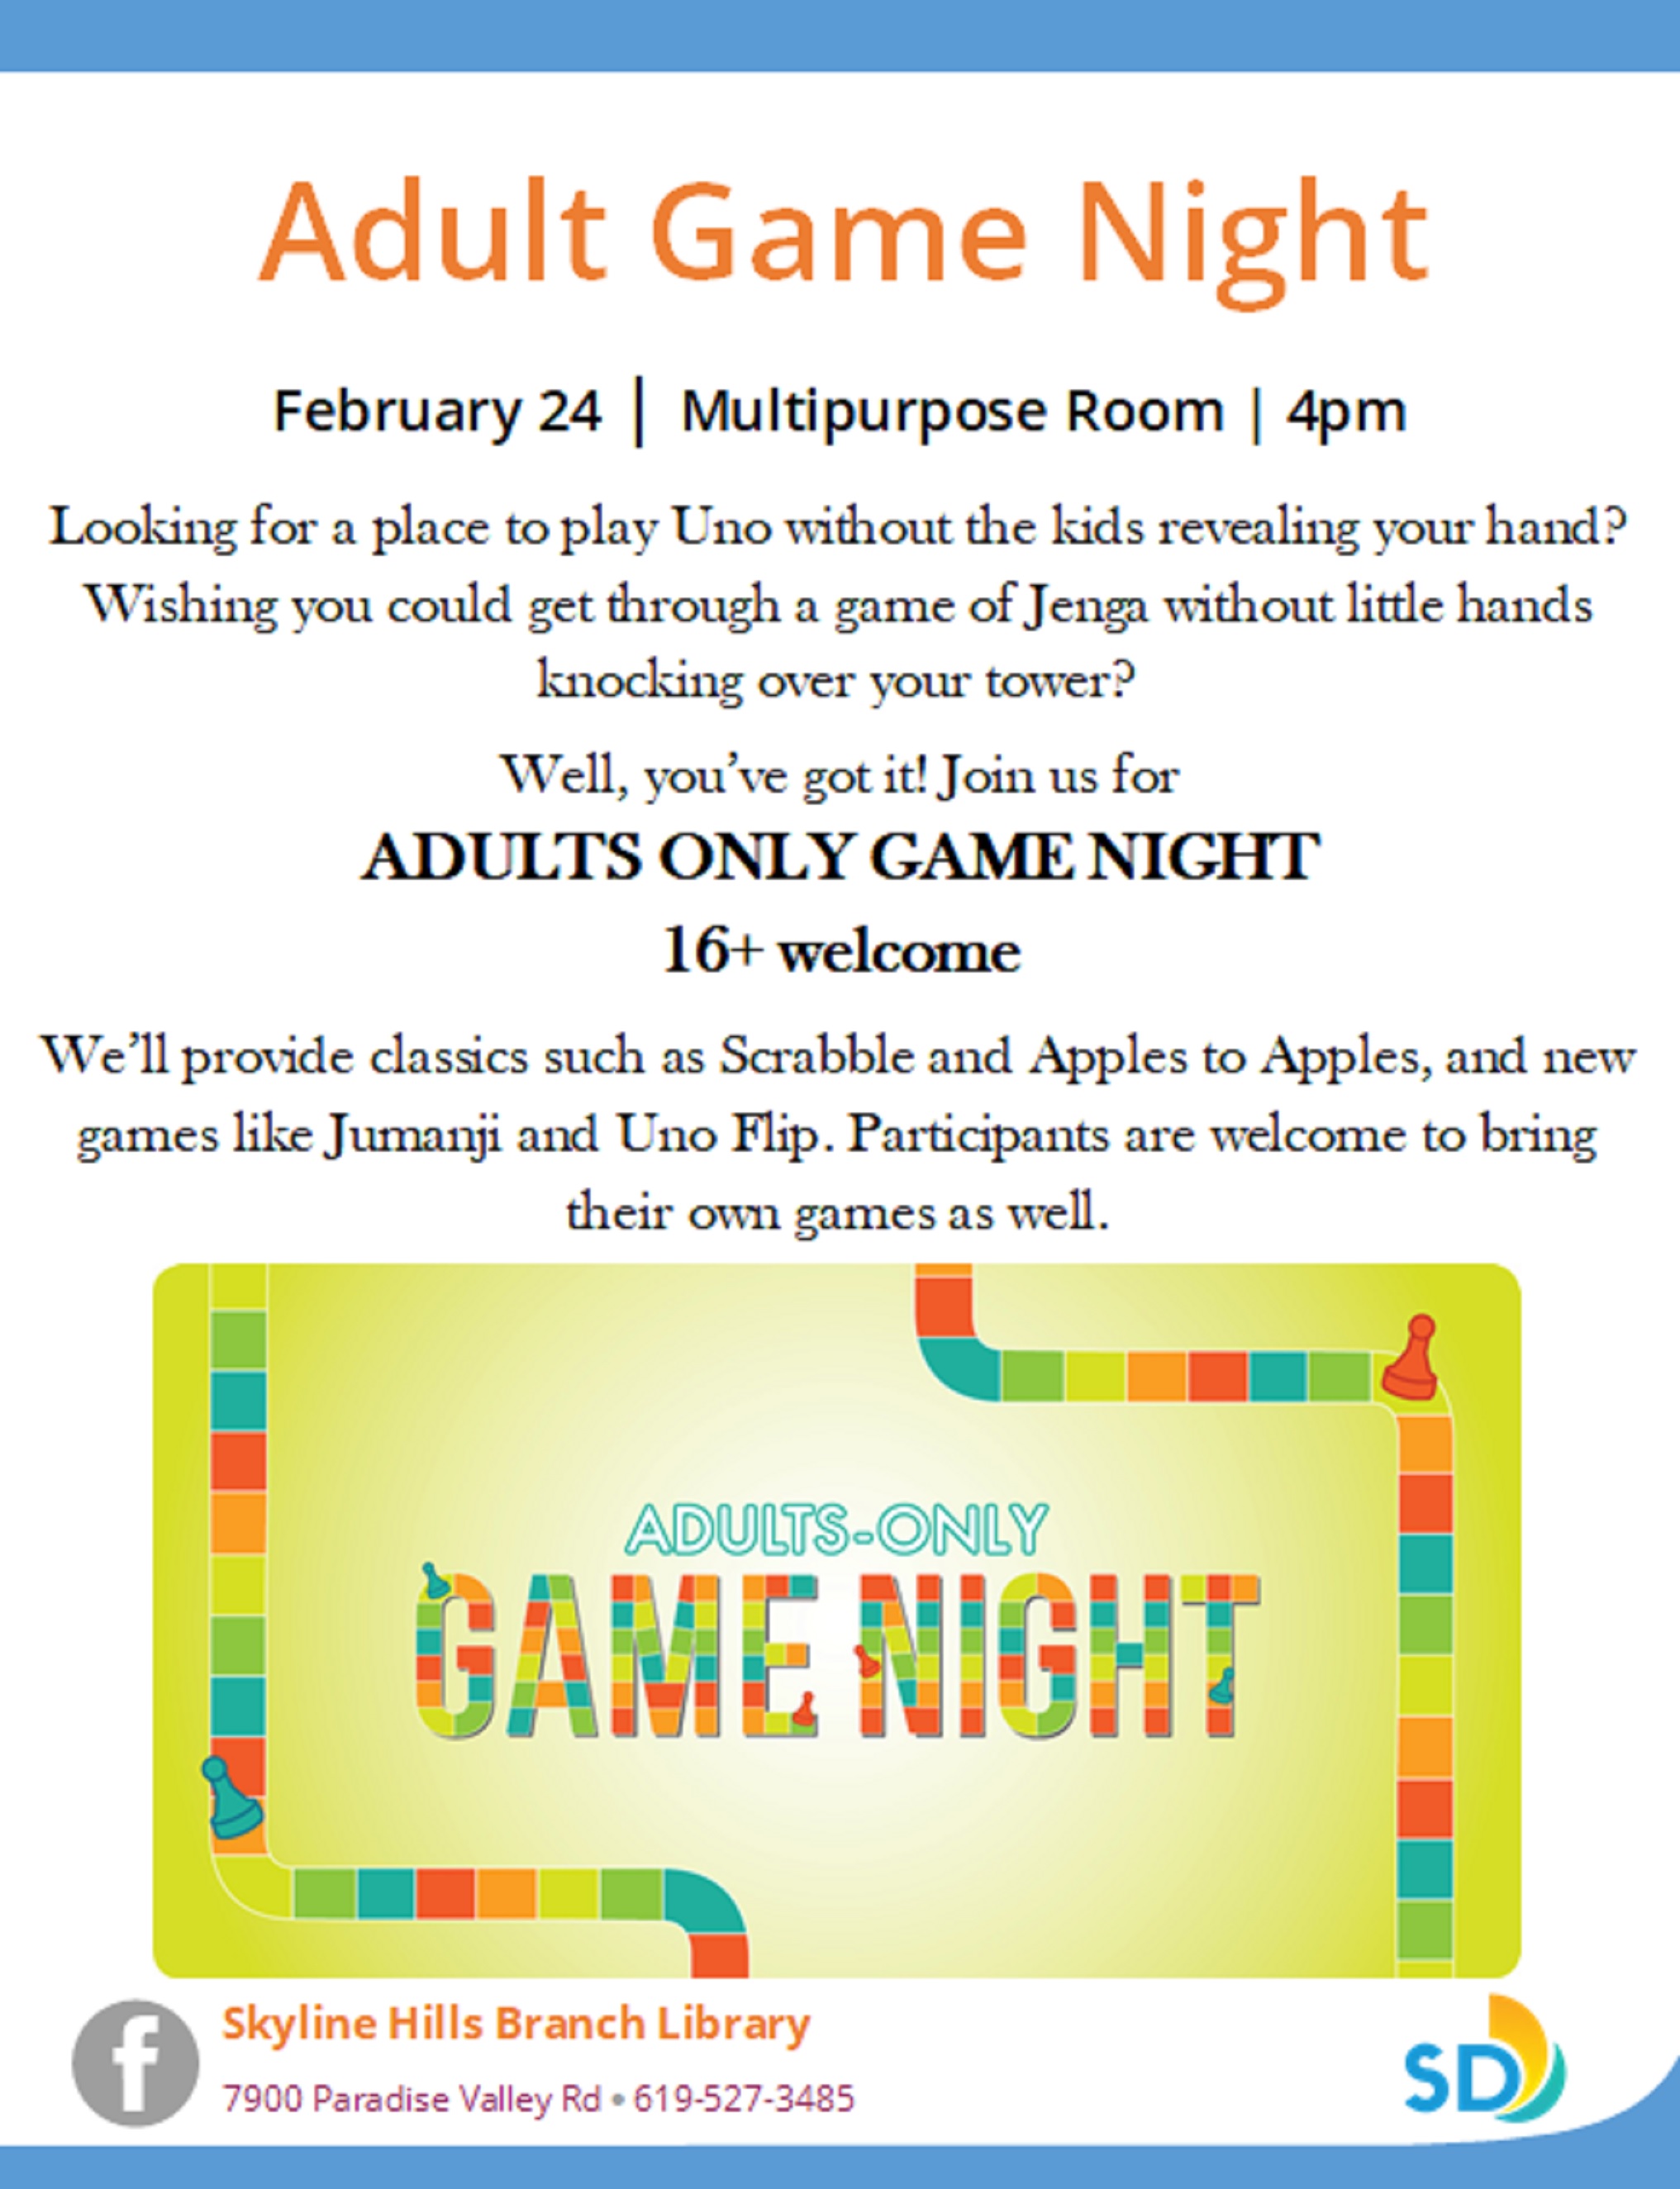 adult-game-night-san-diego-public-library